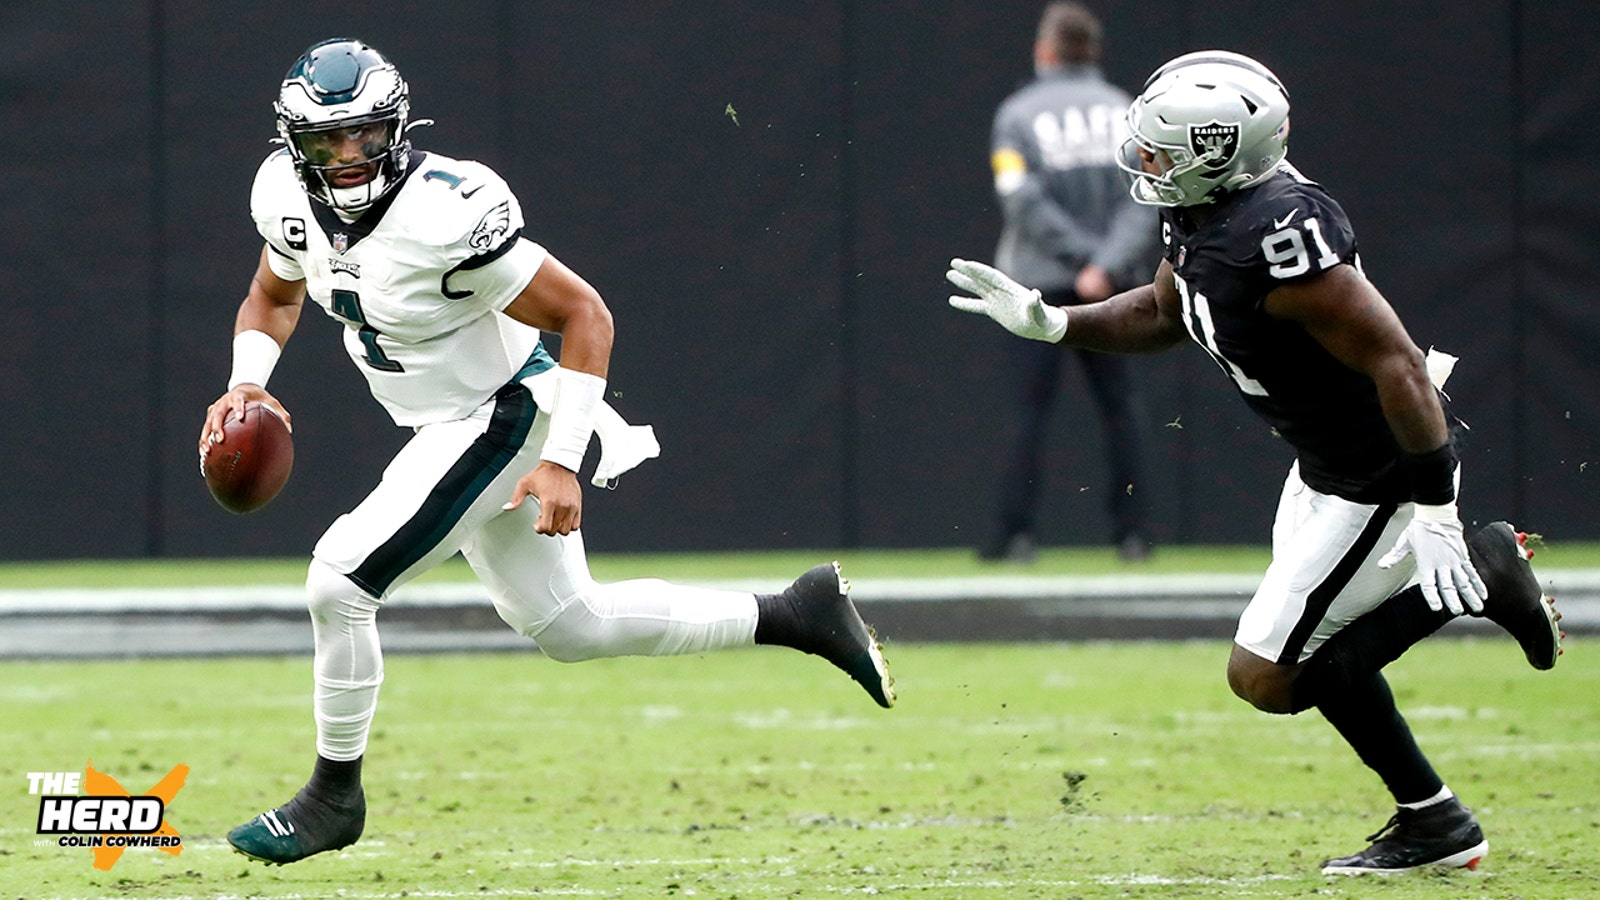 Raiders, Eagles expected to improve on last season's playoff run